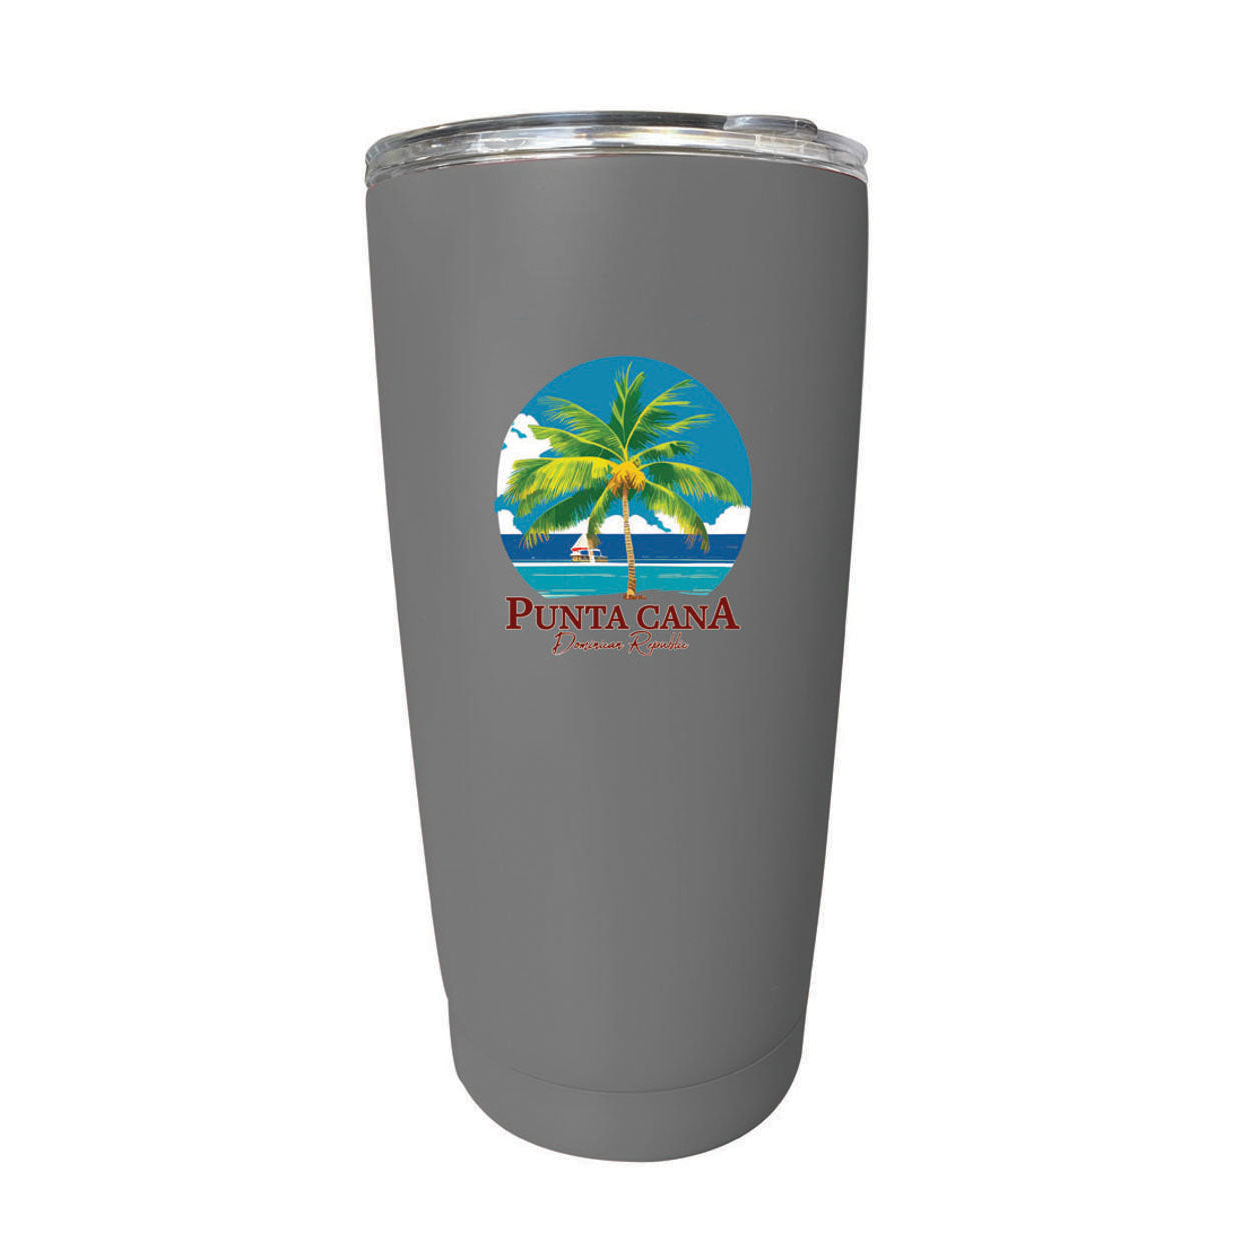 Punta Cana Dominican Republic Souvenir 16 Oz Stainless Steel Insulated Tumbler - Navy, PARROT B